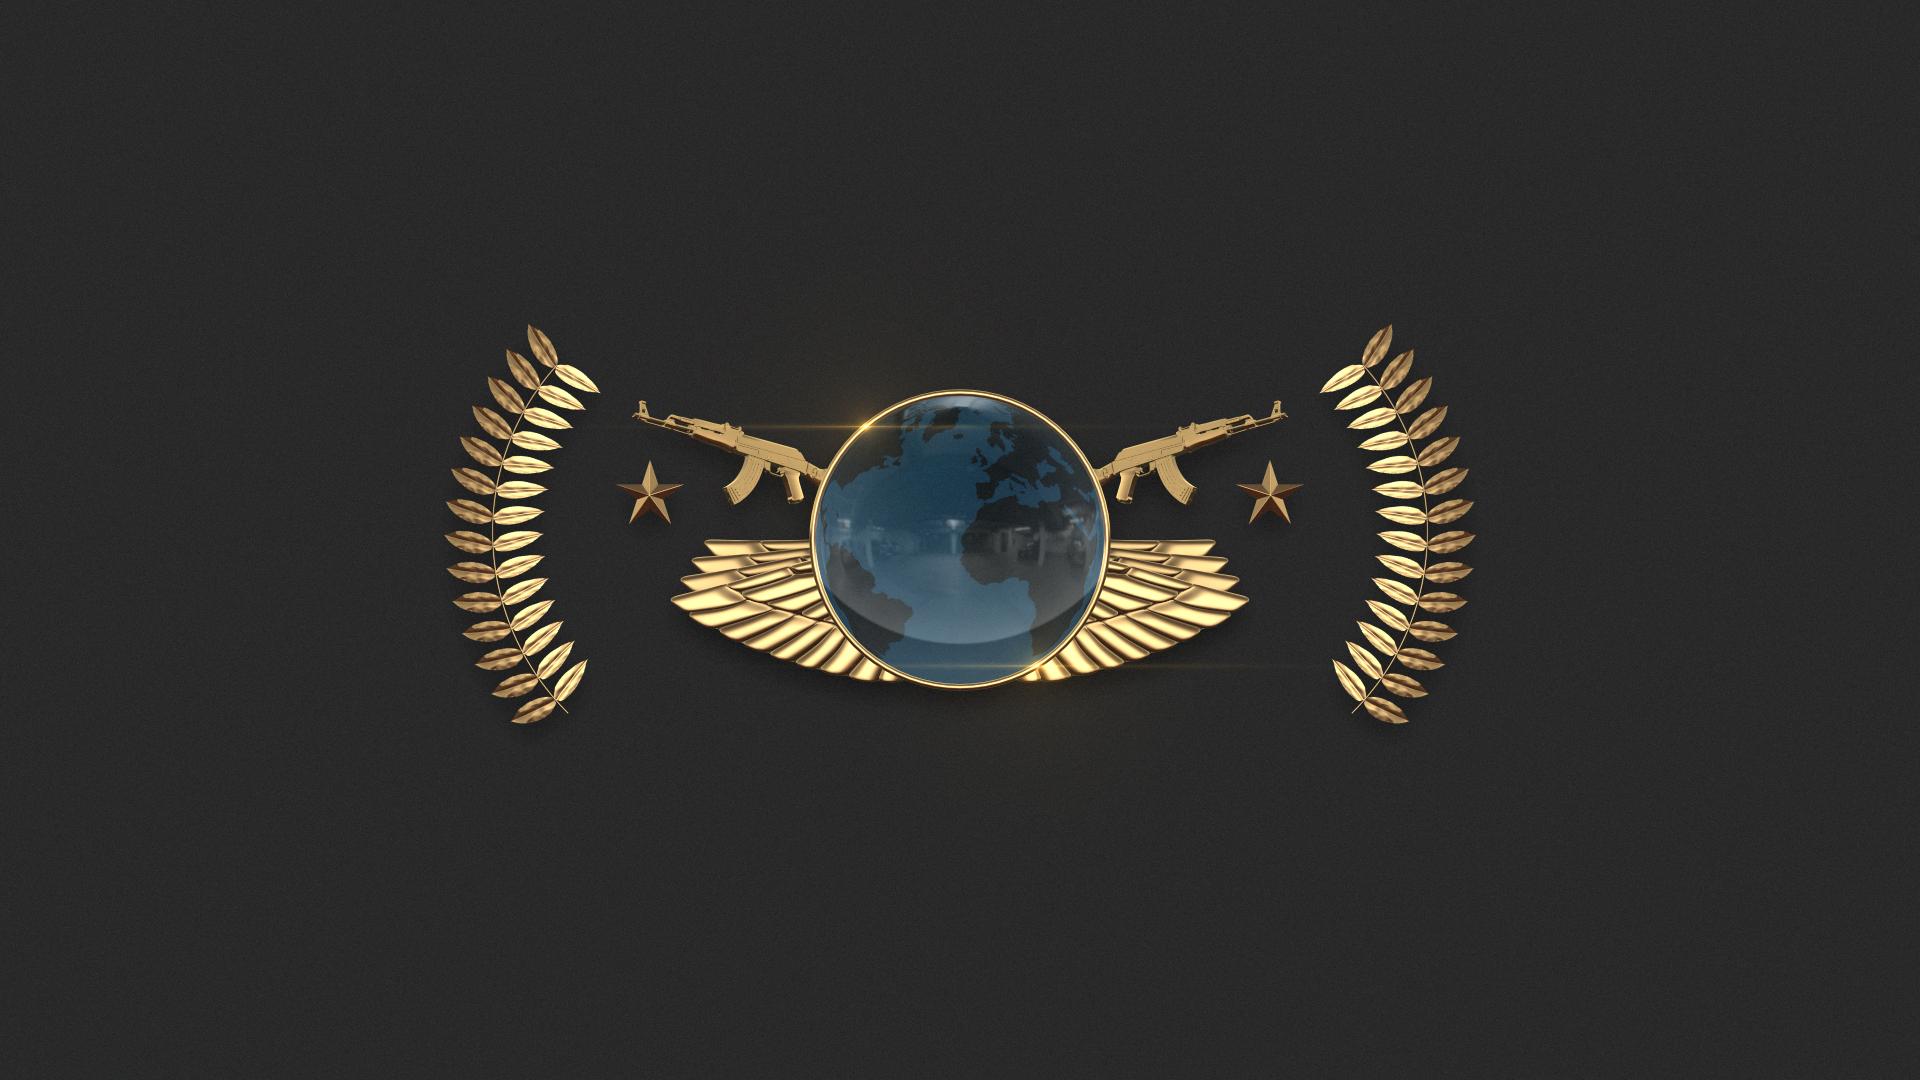 I Made A Global Elite Wallpaper To Celebrate The Rank Up Hope You